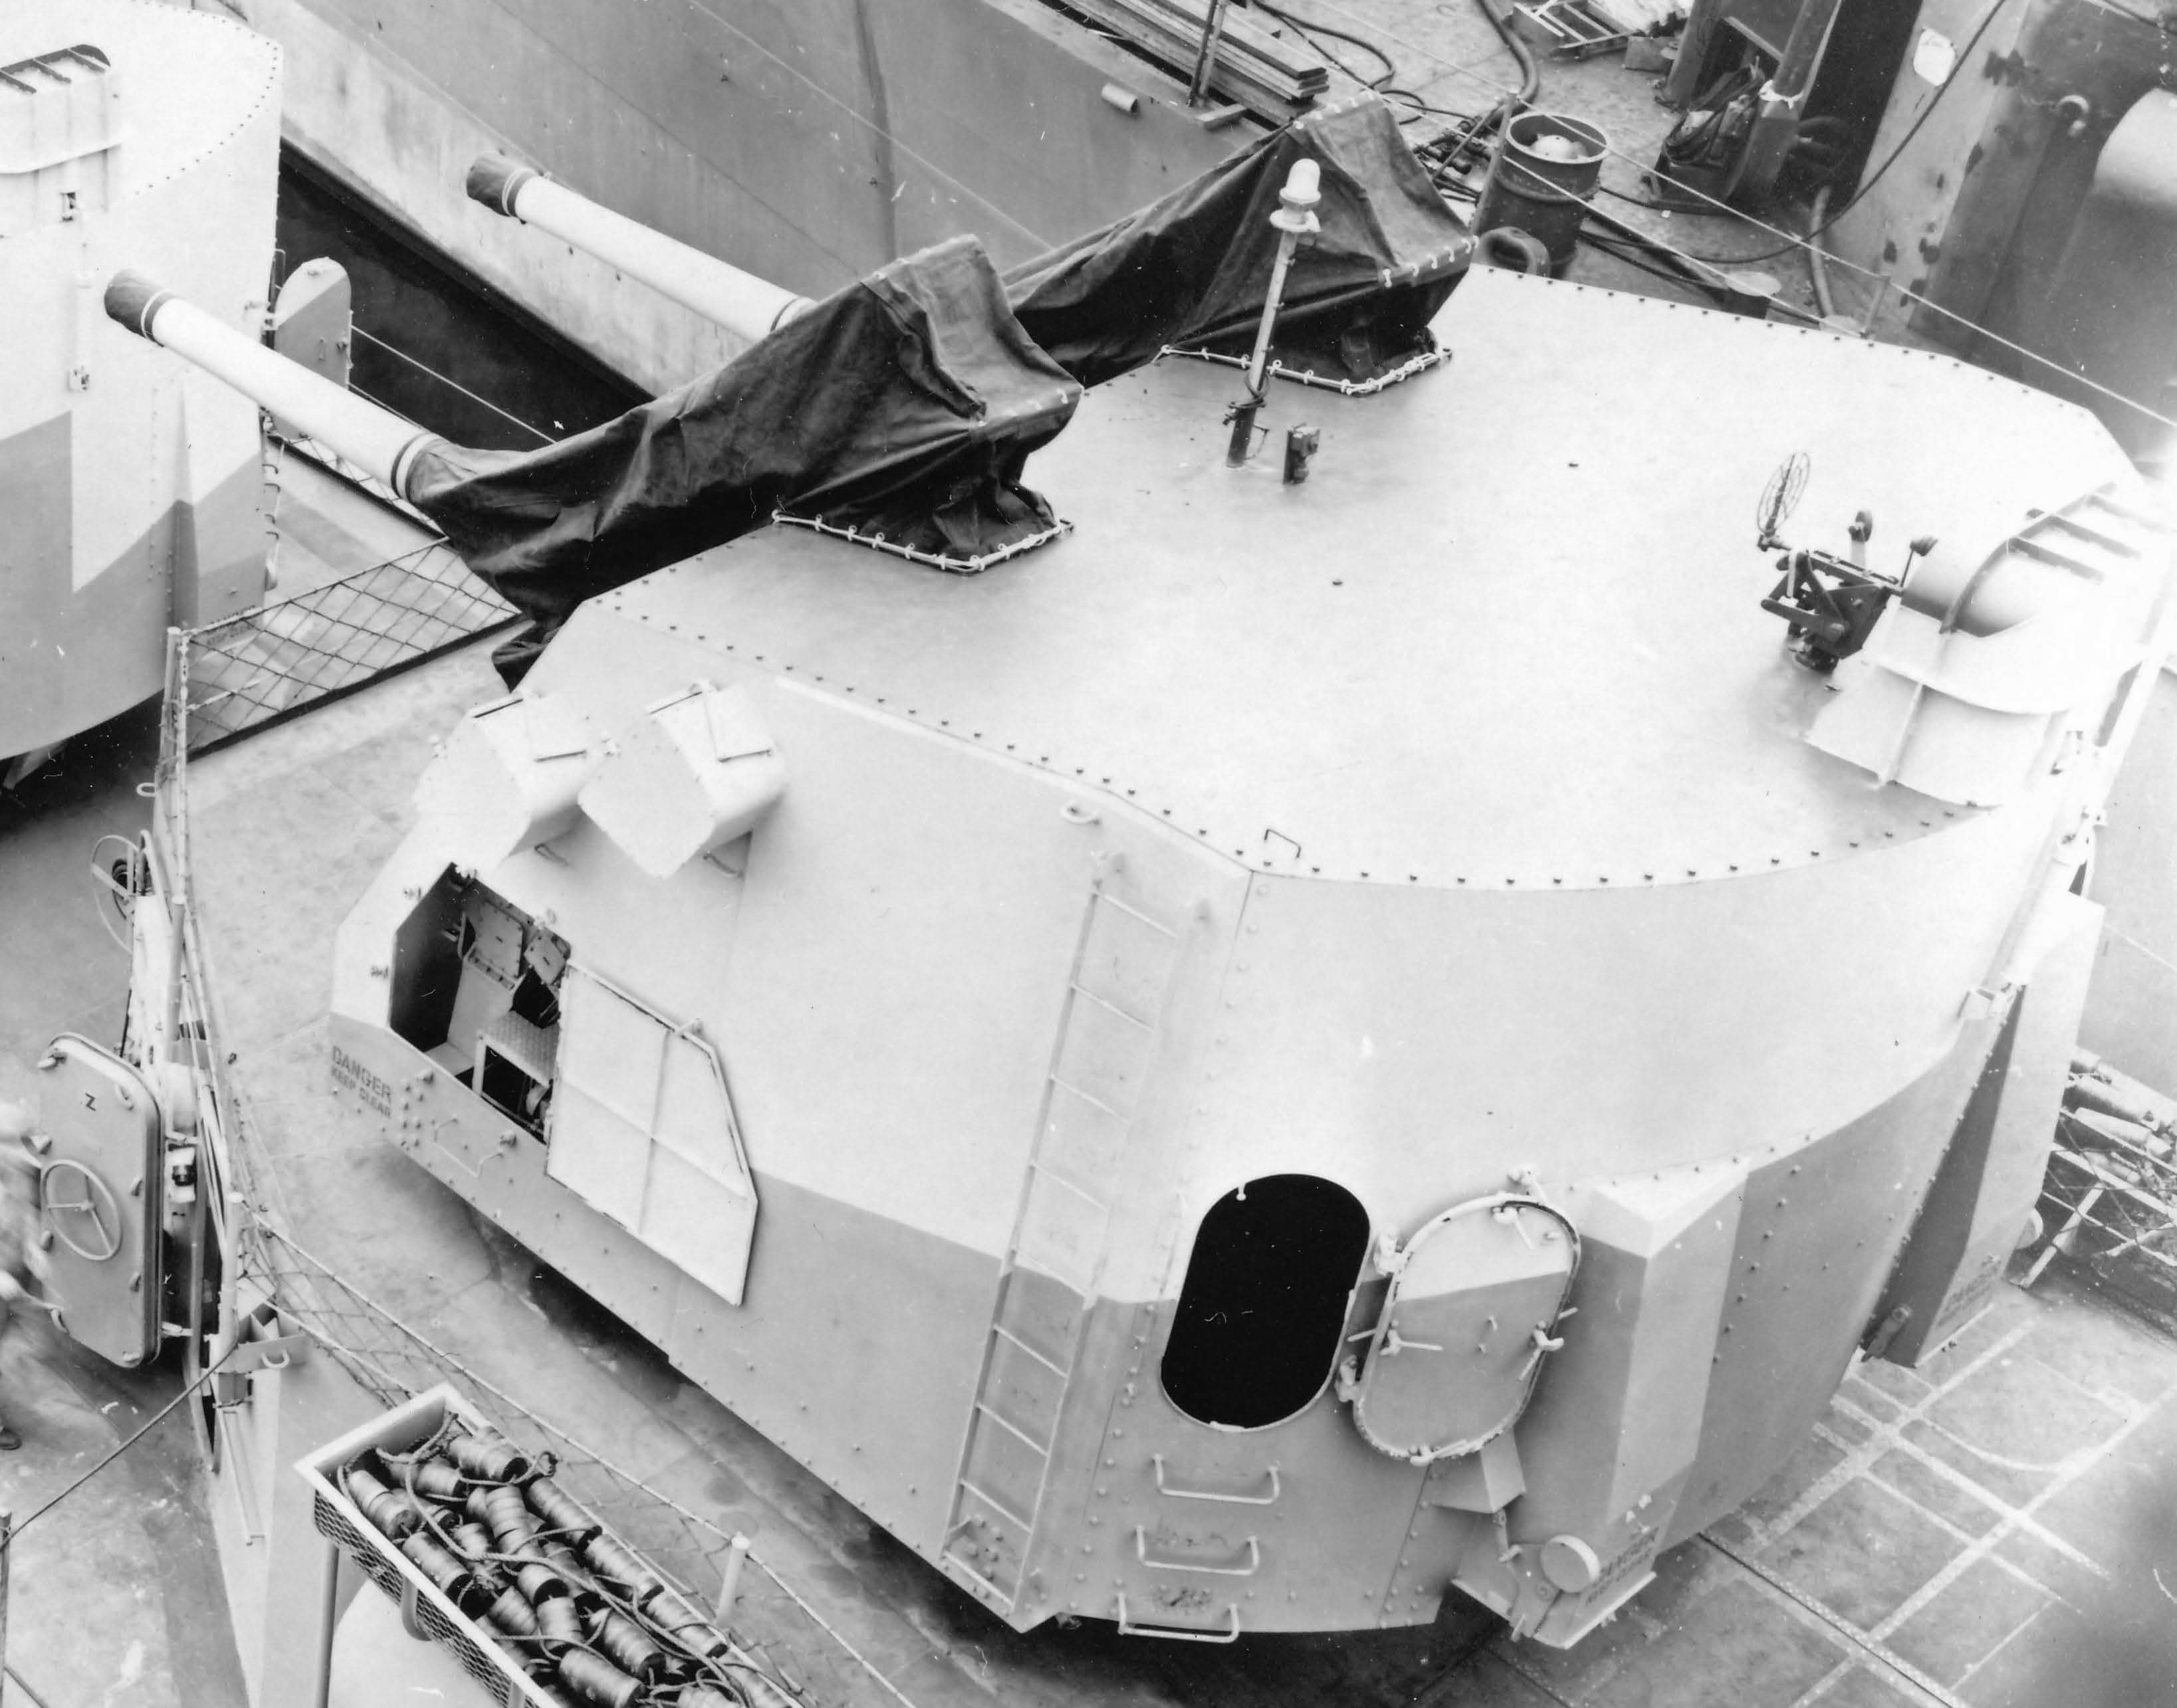 Twin mounted 5-inch/38 caliber gun turret aboard an Allen M. Sumner-class destroyer. Note expended casings in netting beside the turret.